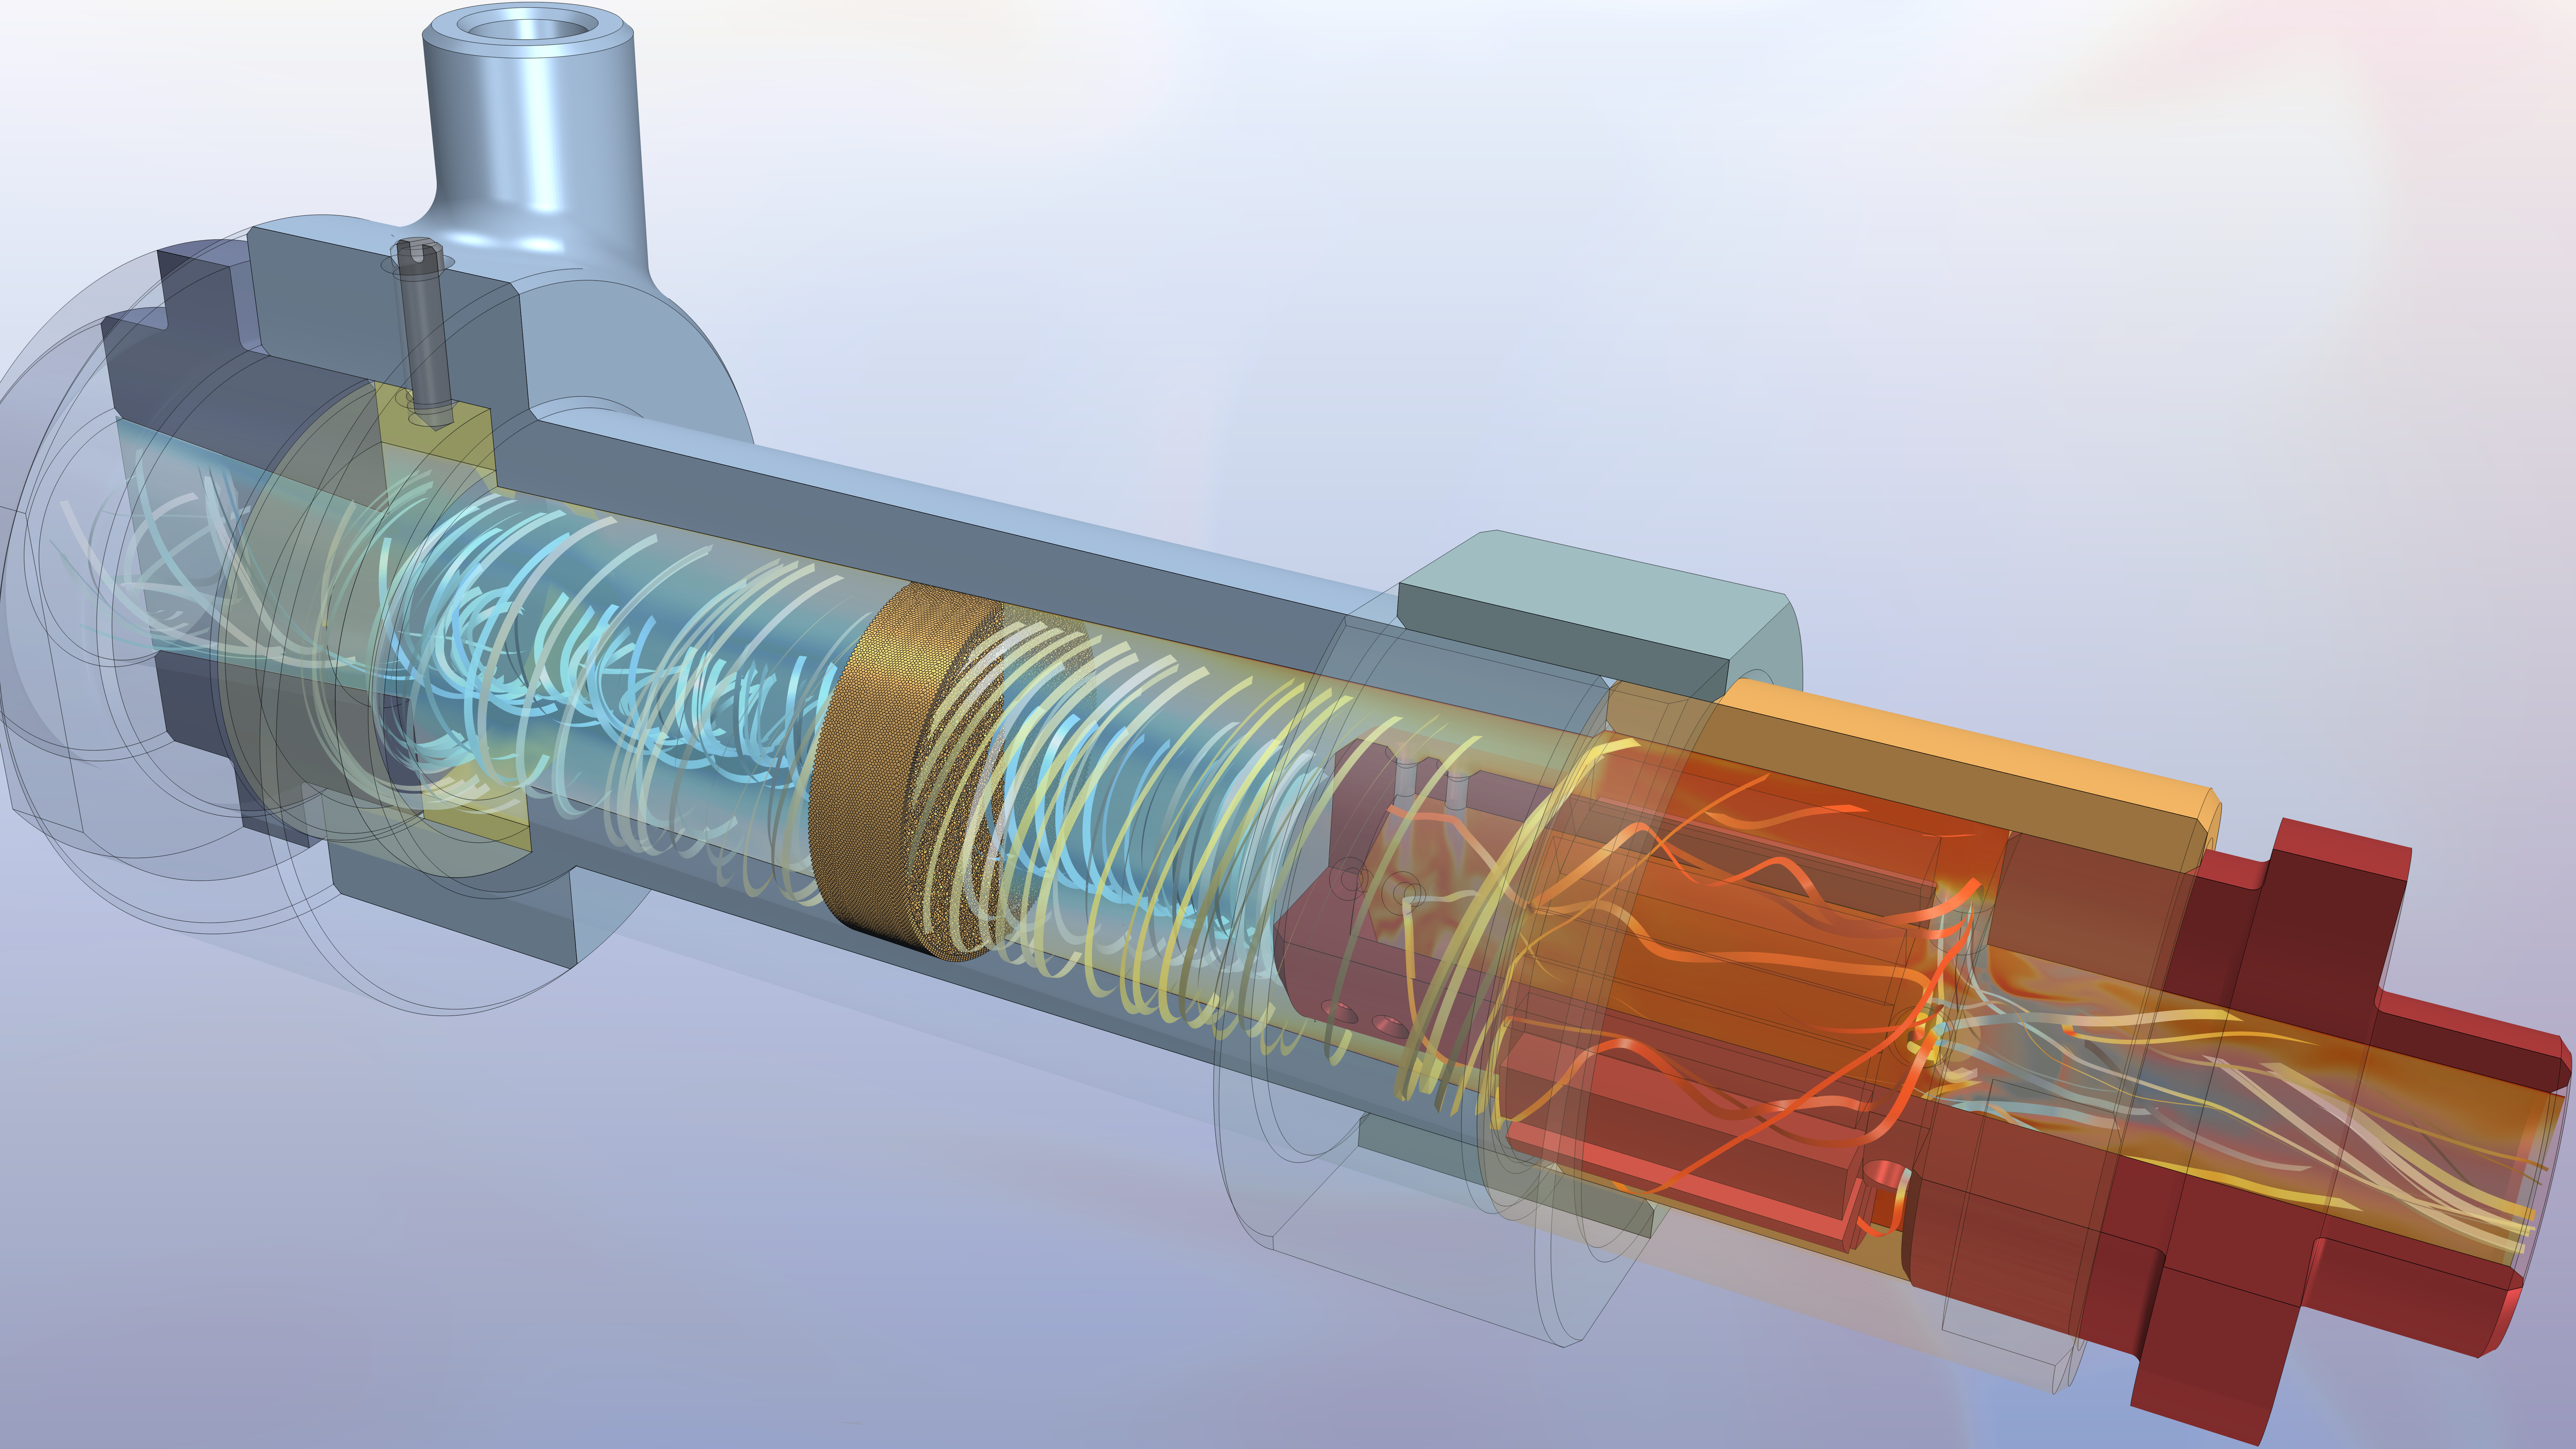 Cross section of simulated liquid flow through a 3D pump